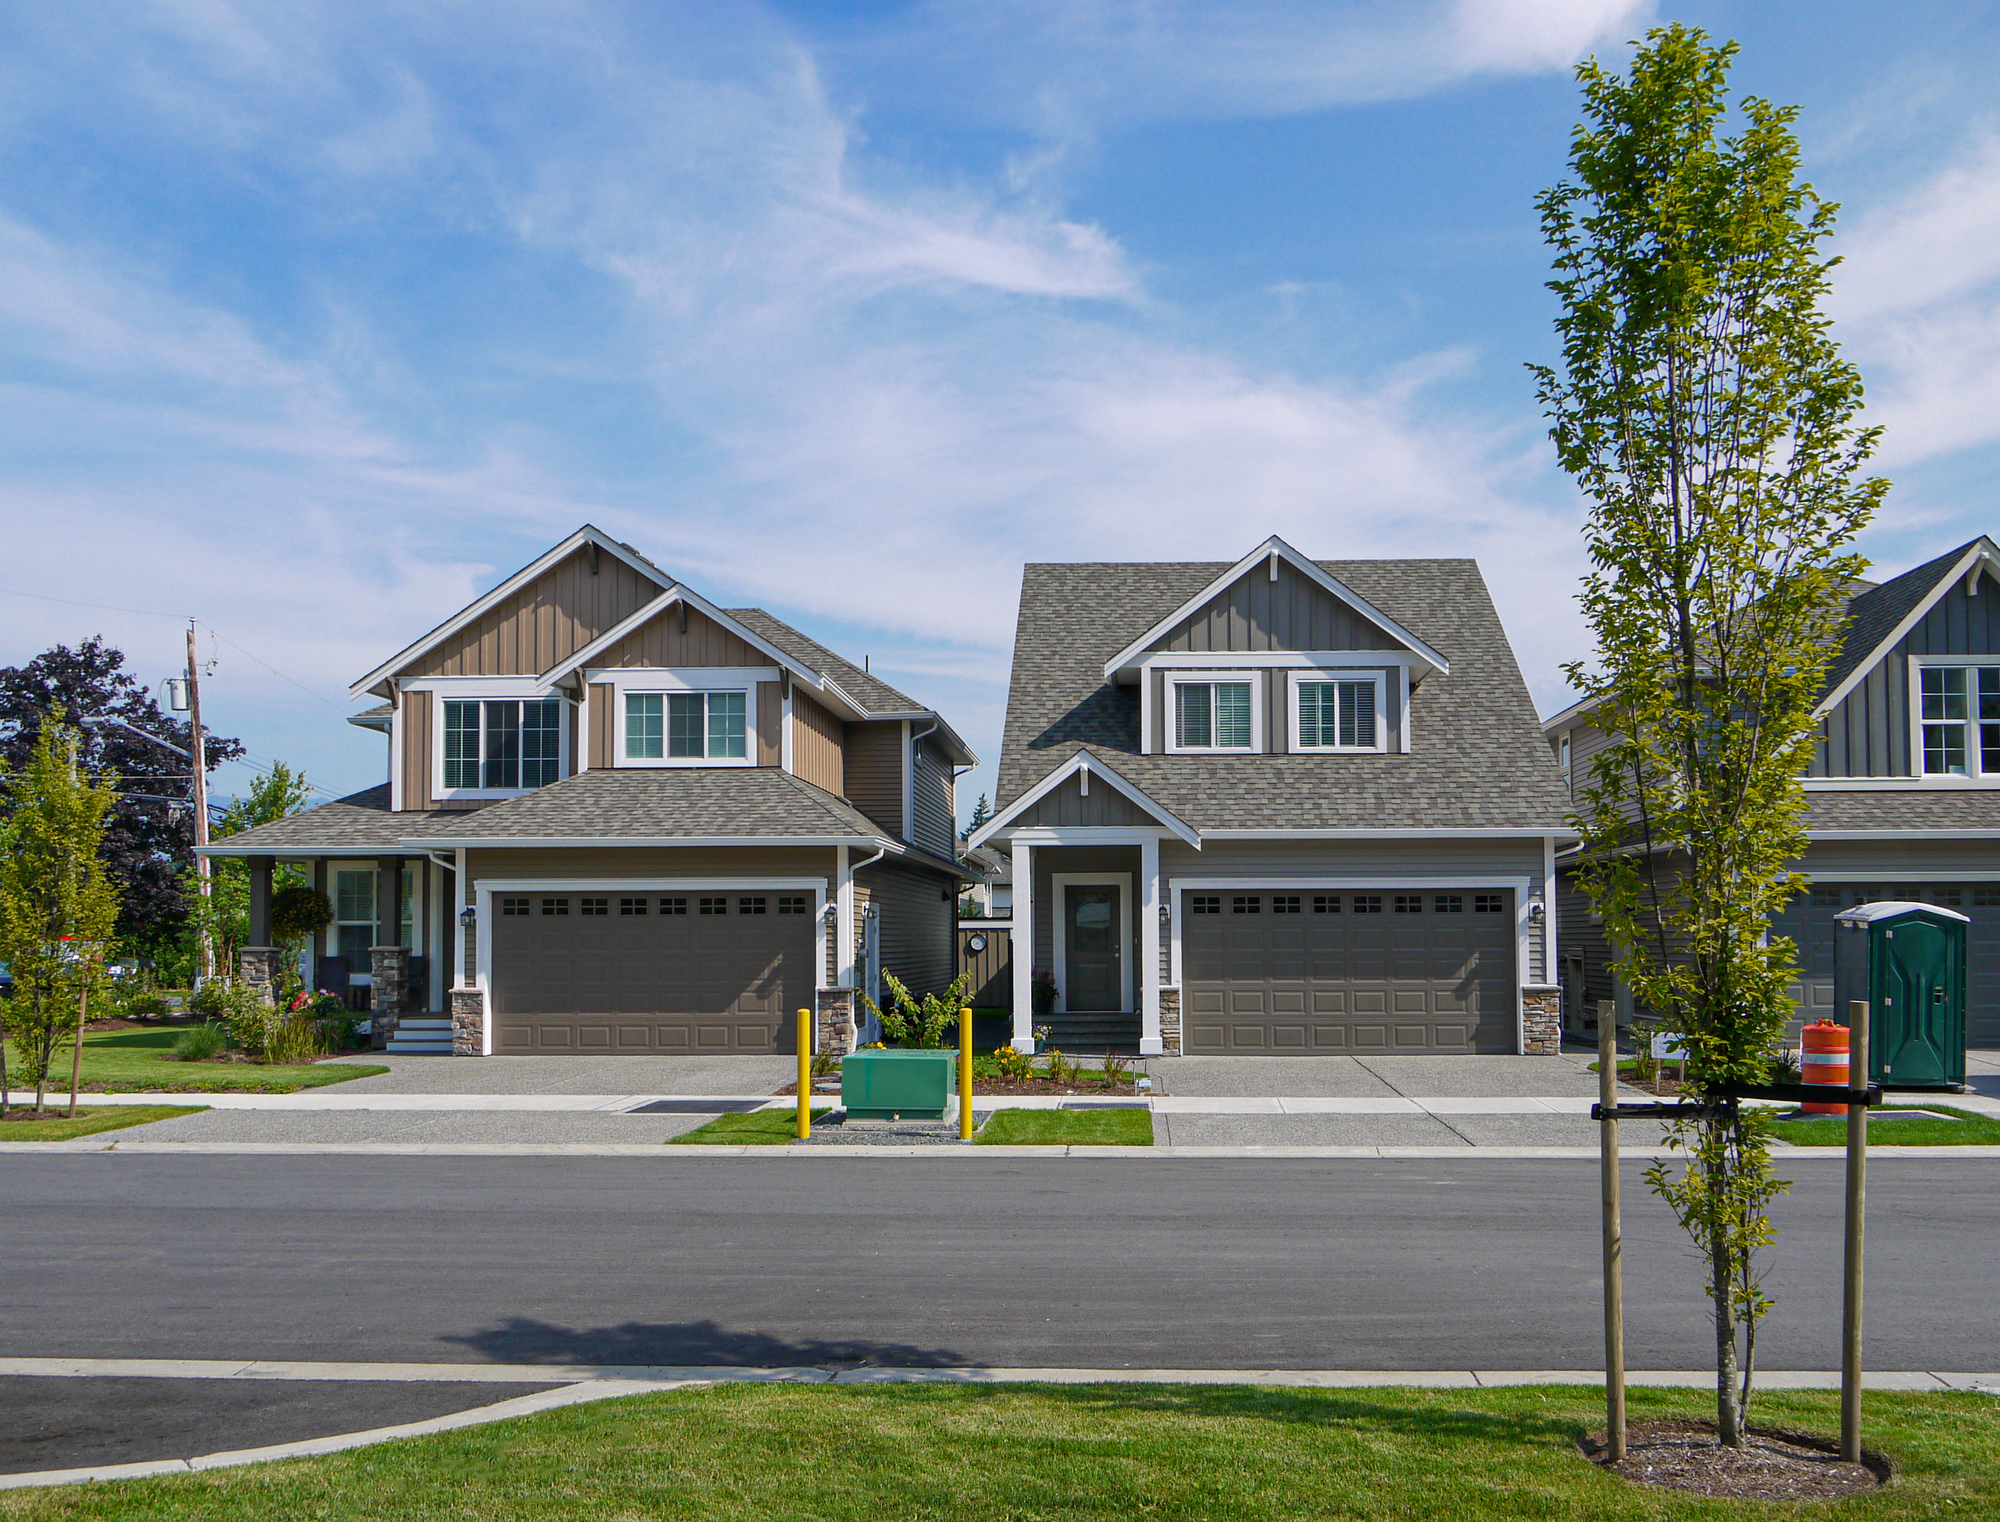 Brand new residential houses with concrete driveway and asphalt road in front